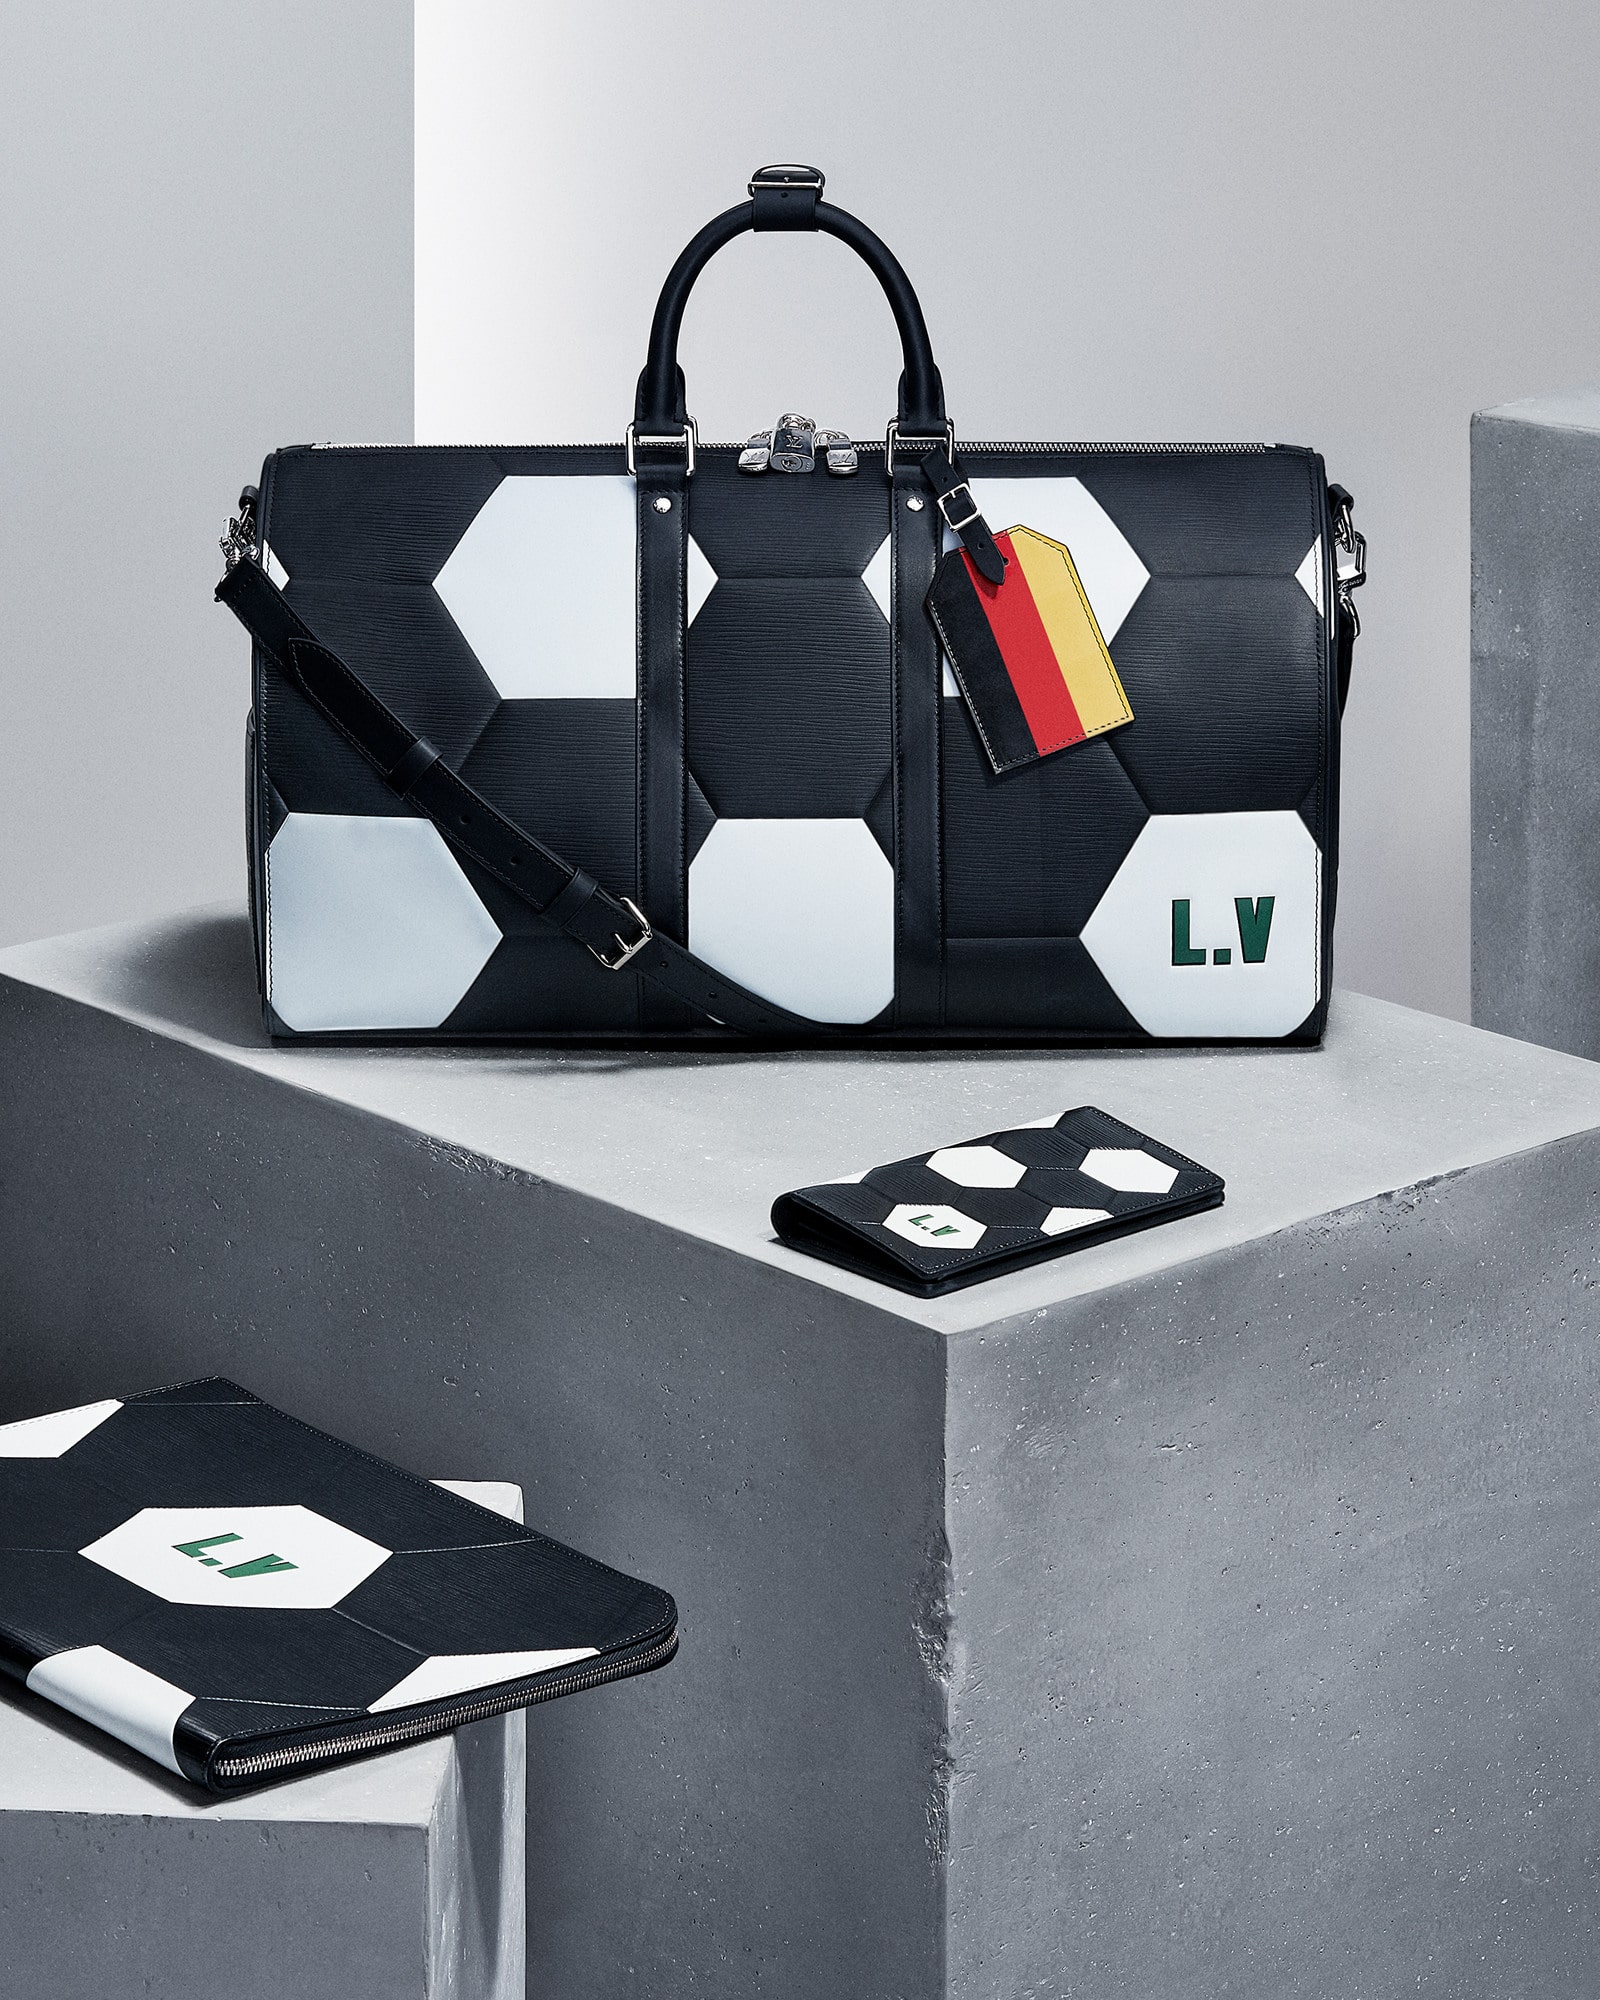 First Louis Vuitton Store In The World Cup 2018